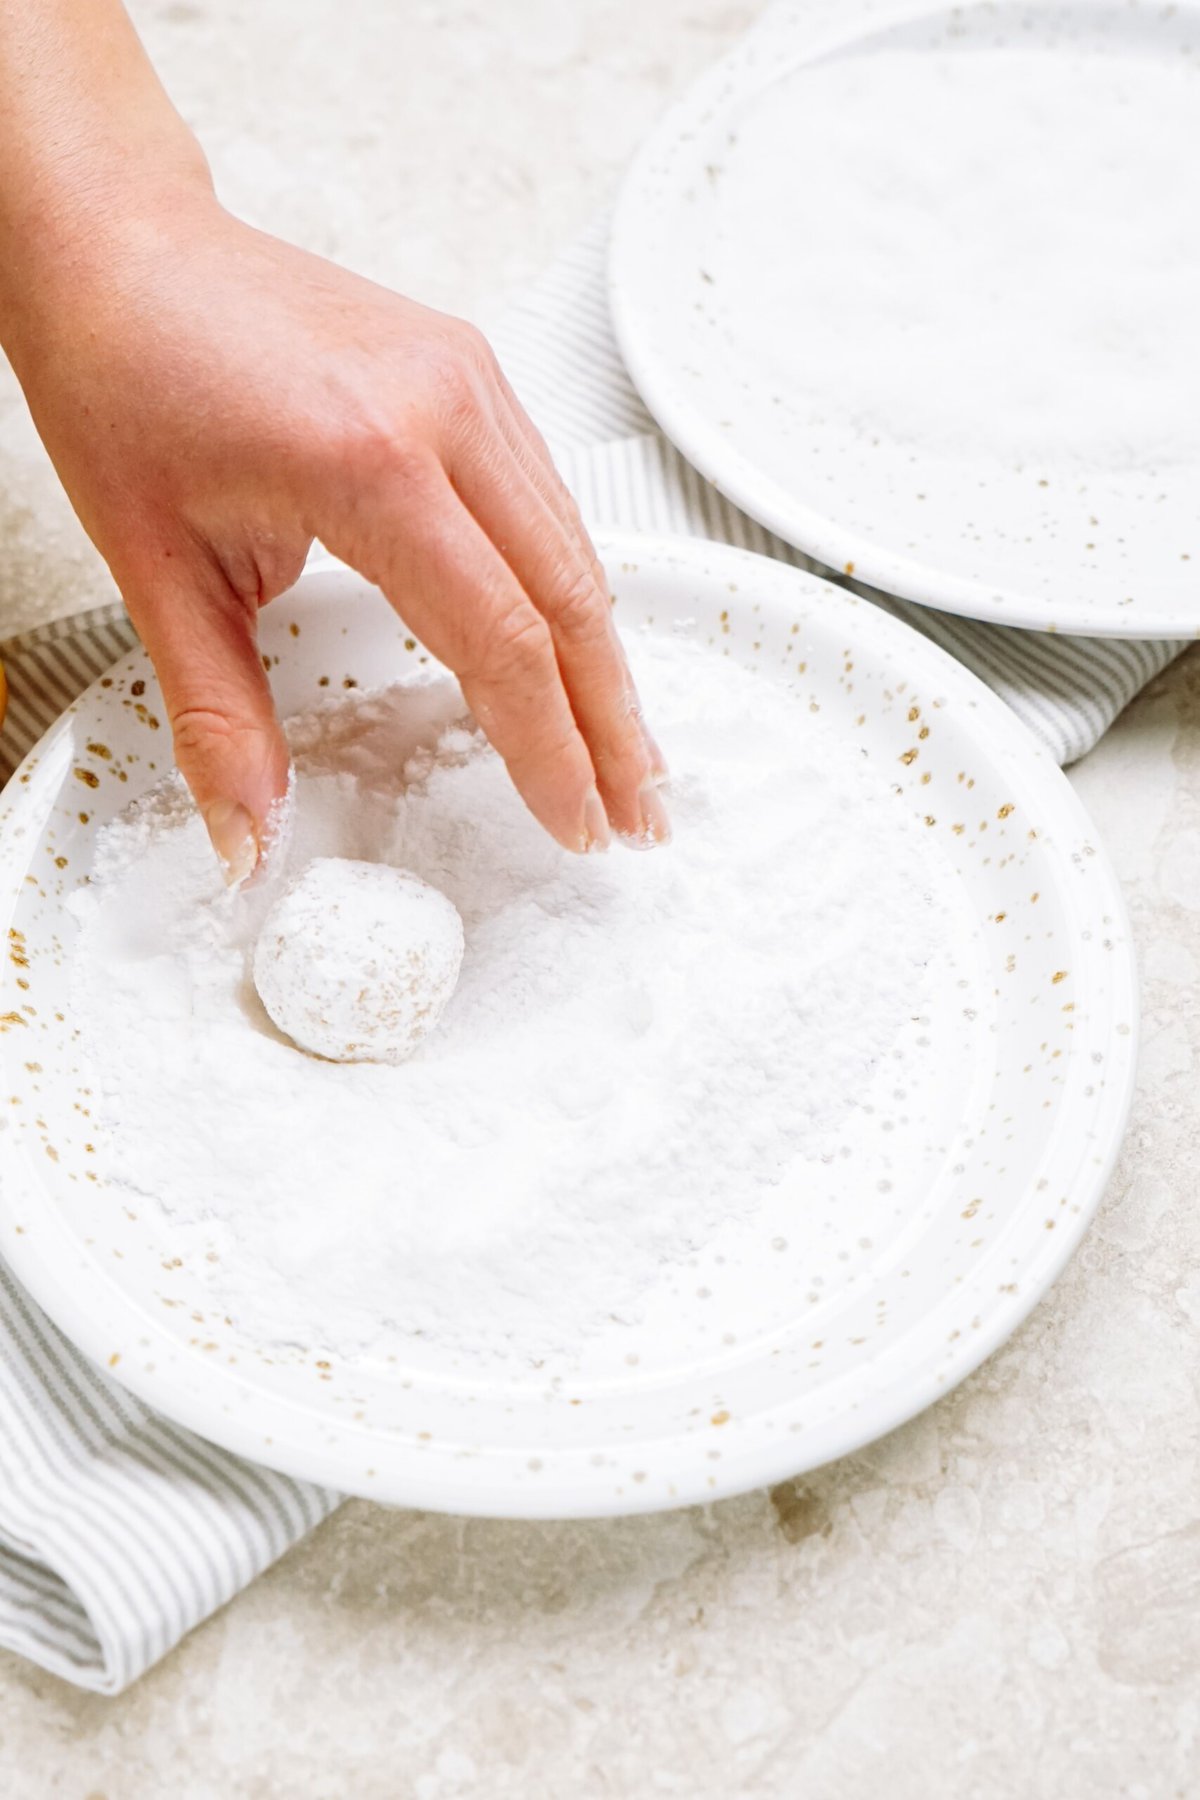 A person's hand coating a small round dough ball in powdered sugar on a white plate.